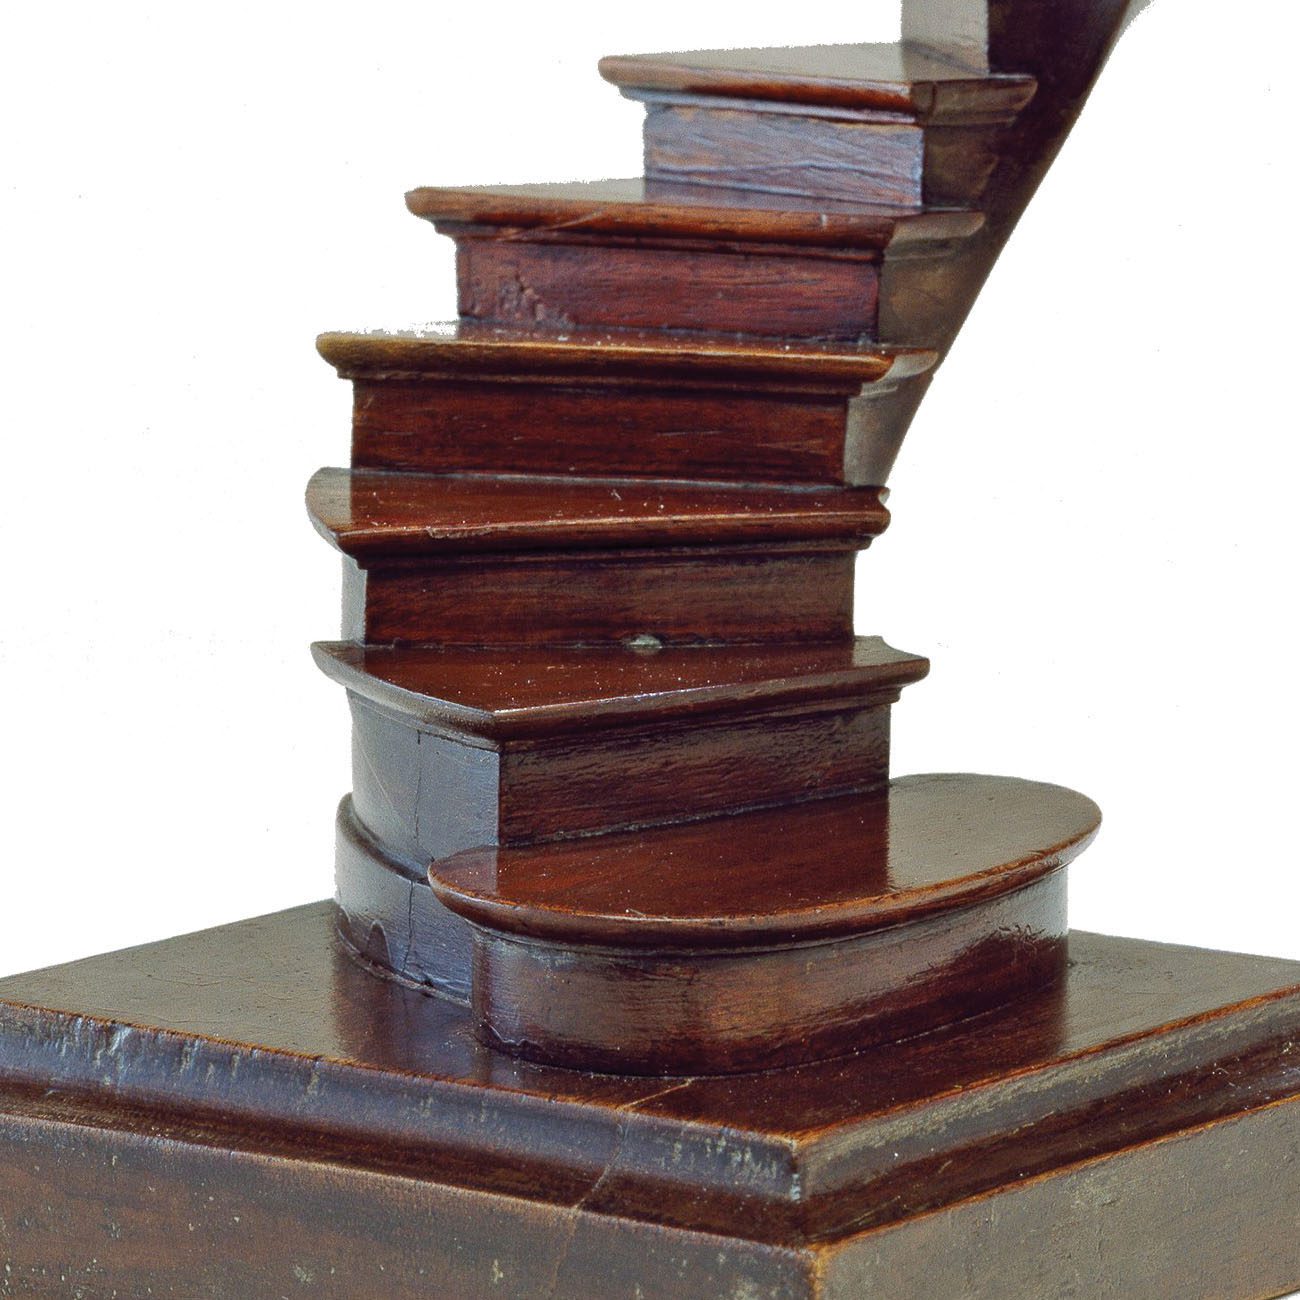 A miniature staircase built by a member of the French compagnon society of woodworkers. Trade guilds like the compagnons are distant cousins to fraternal societies like the Freemasons.